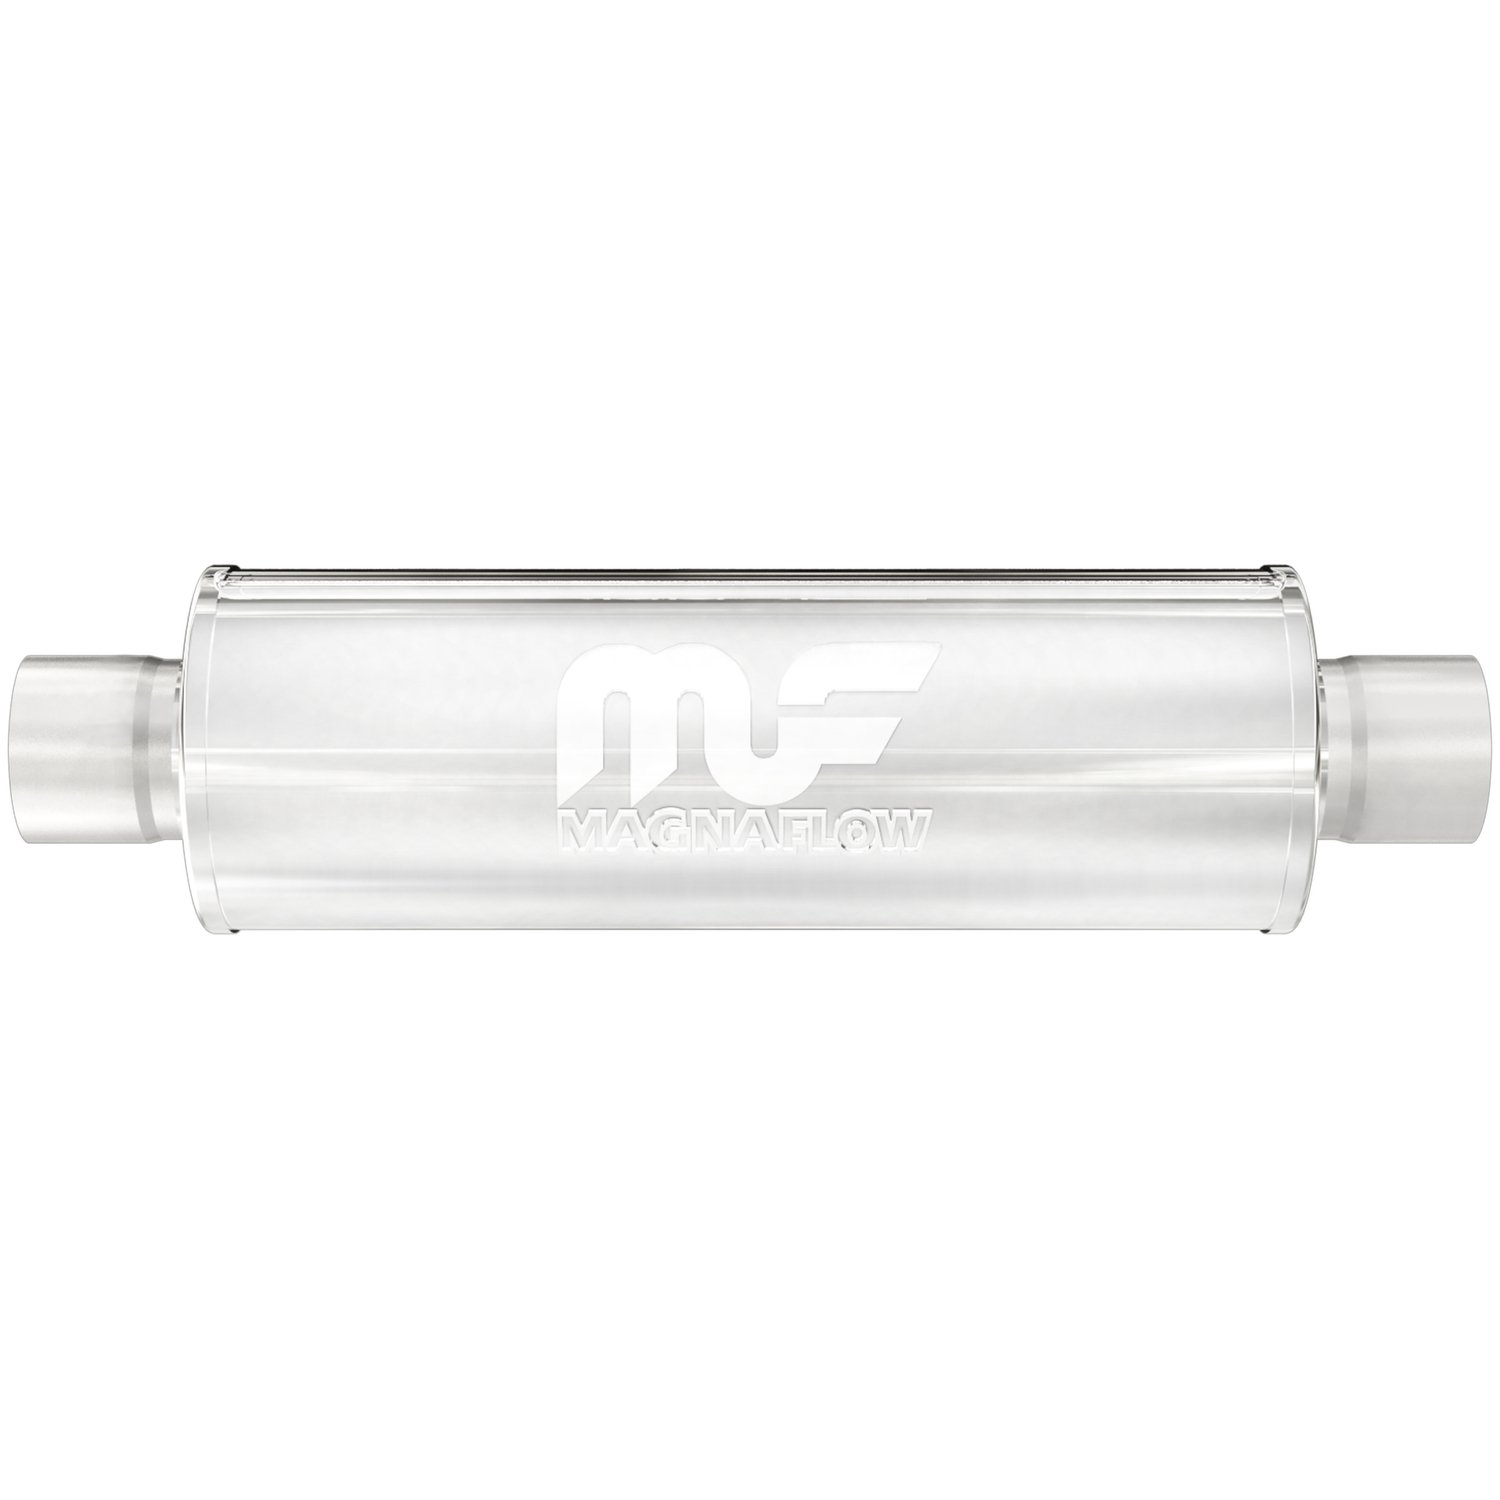 4" Round Muffler Center In/Center Out: 2" Body Length: 22" Overall Length: 28" Core Size: 2.5" Satin Finish